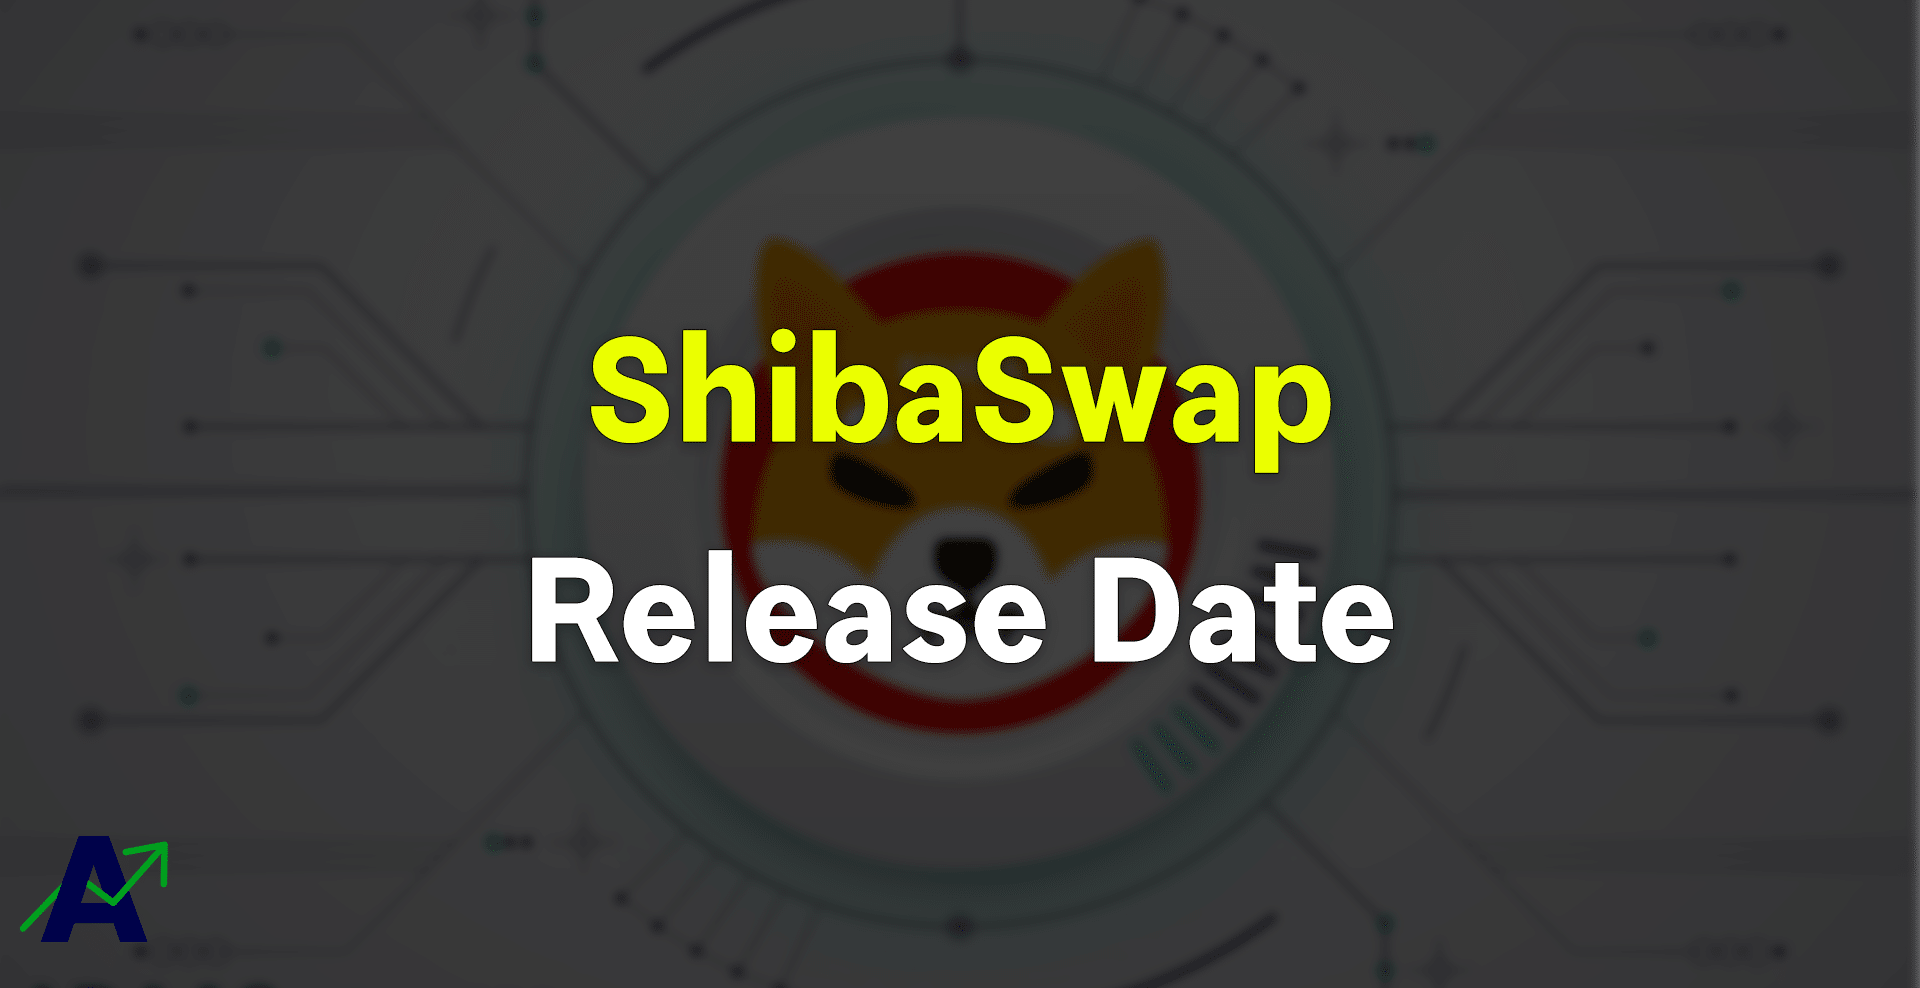 shibaswap release date and how to use